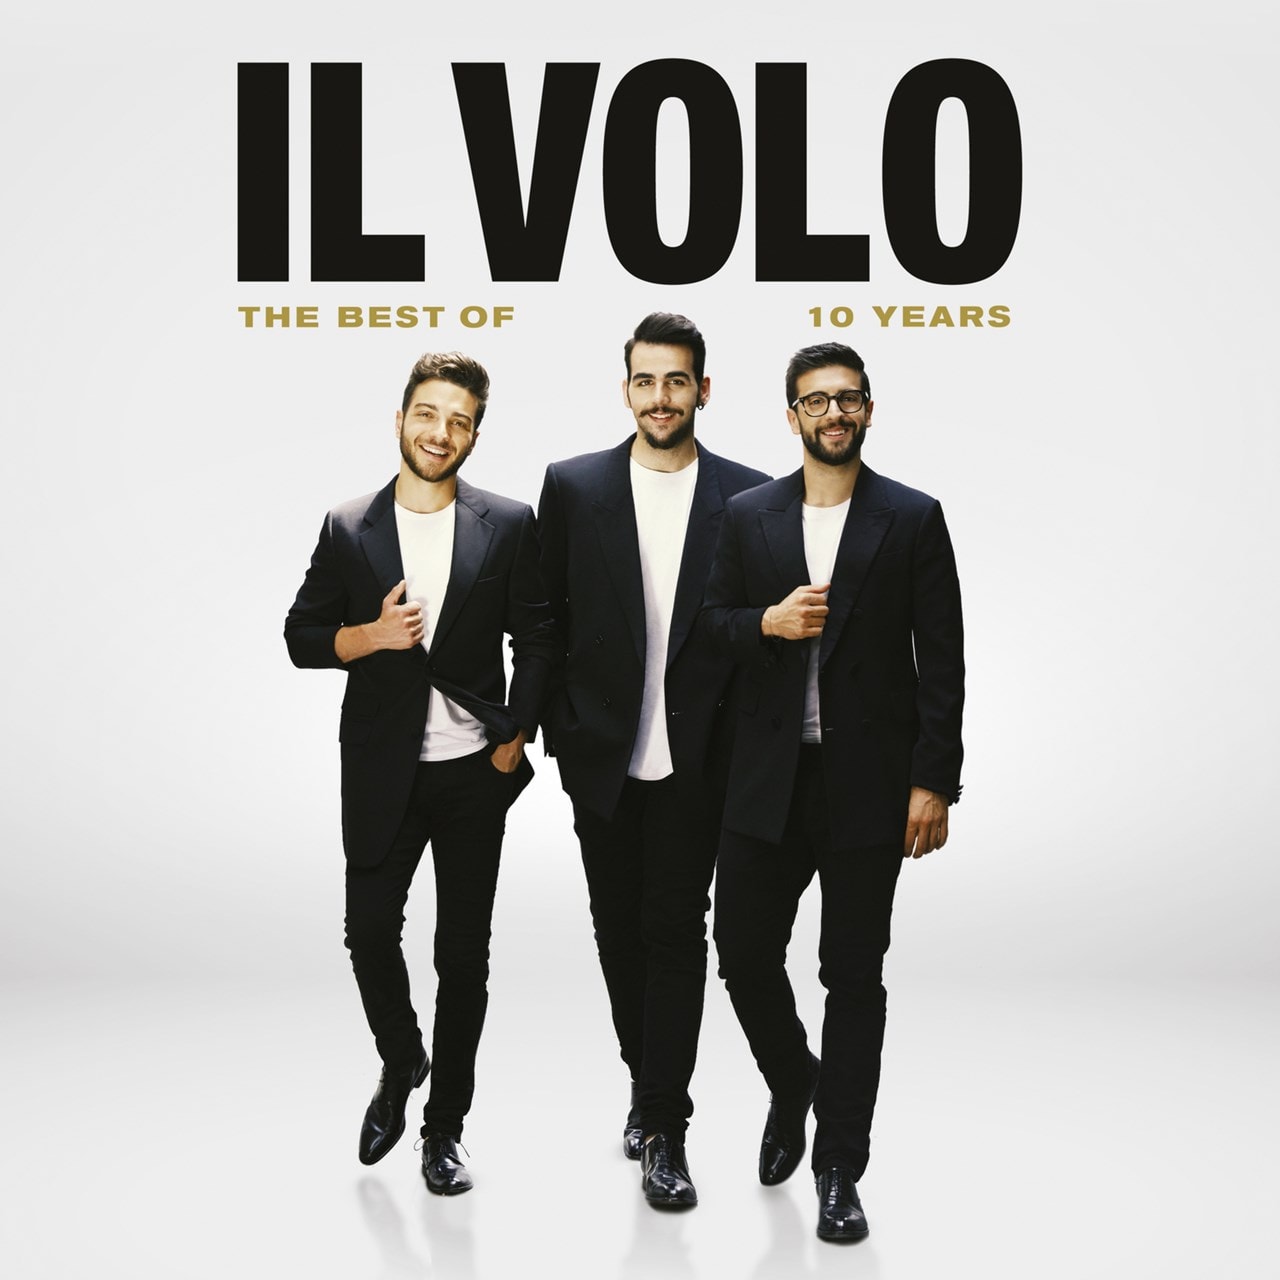 10 Years The Best of Il Volo CD/DVD Album Free shipping over £20